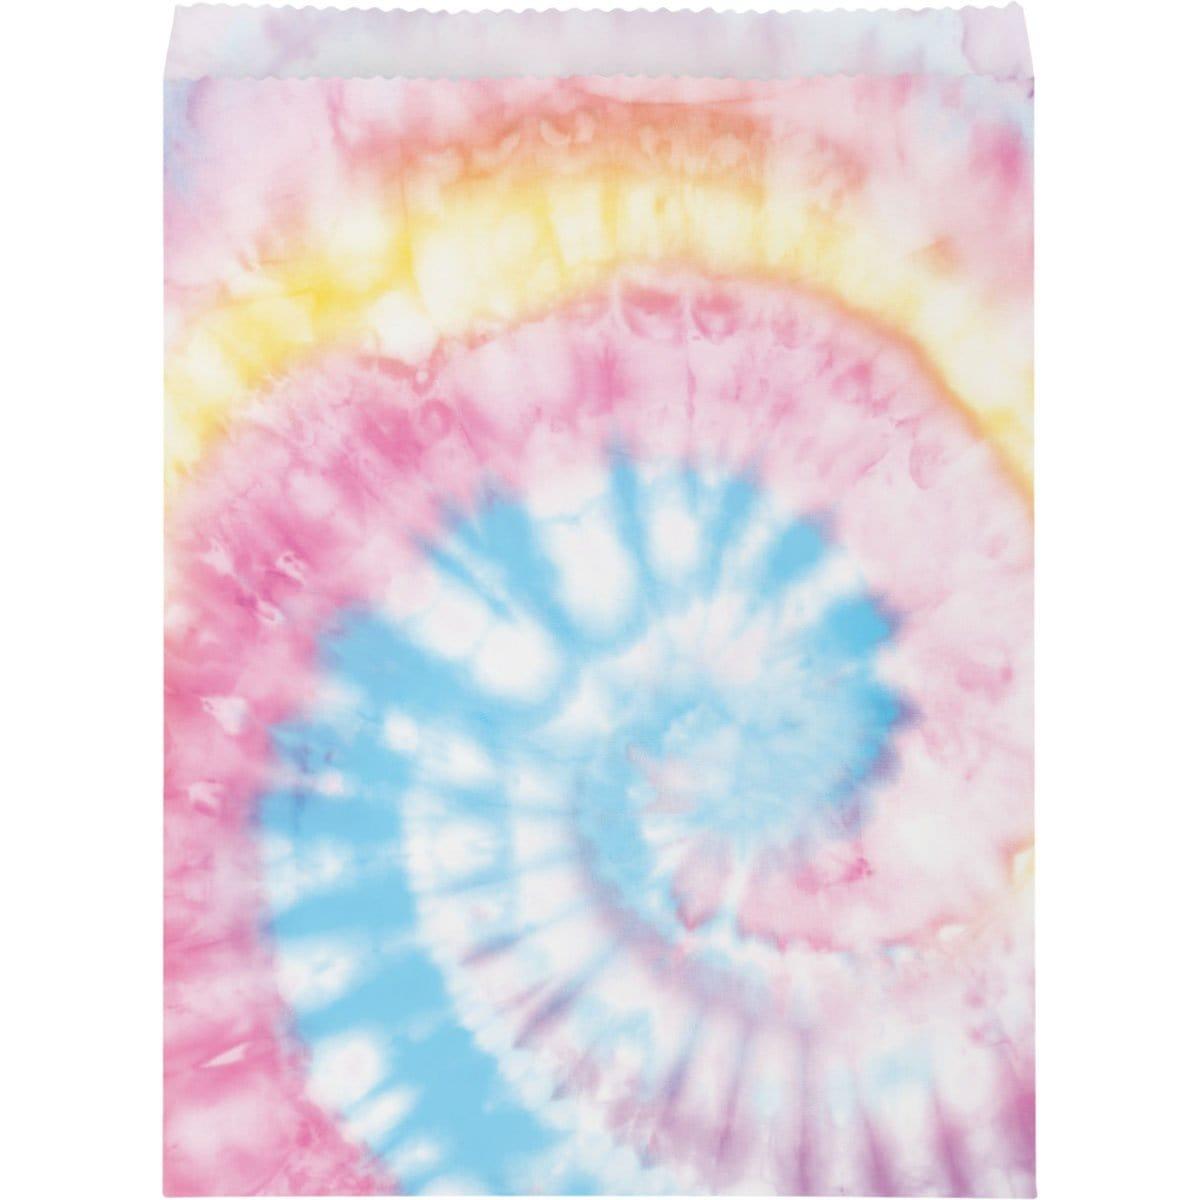 Buy Kids Birthday Tie Dye Party Treat Bags, 8 Count sold at Party Expert